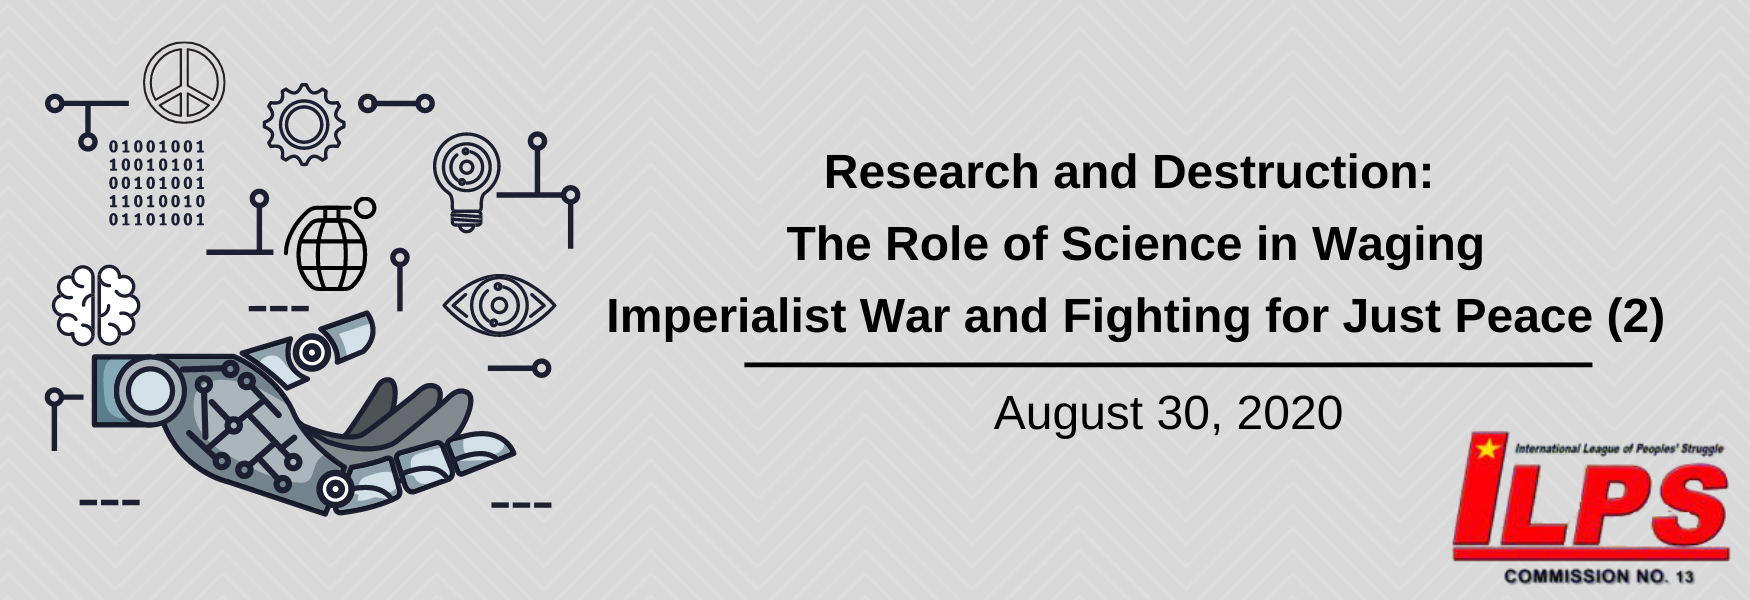 Research and Destruction – The Role of Science in Waging Imperialist War and Fighting for Just Peace